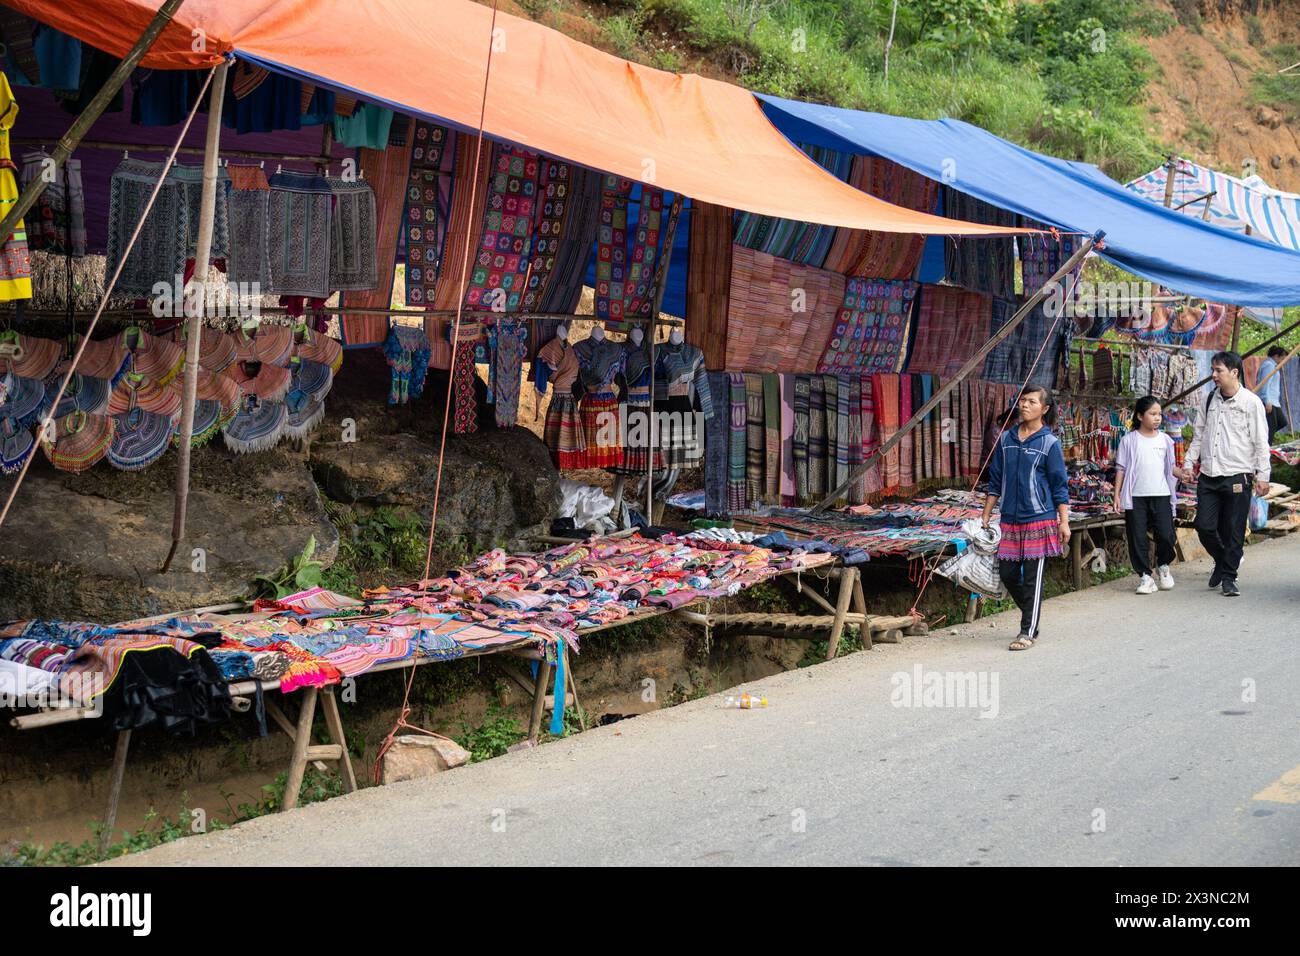 Colourful traditional clothing and items for sale at Can Cau Market in Lao Cai Province, Vietnam Stock Photo